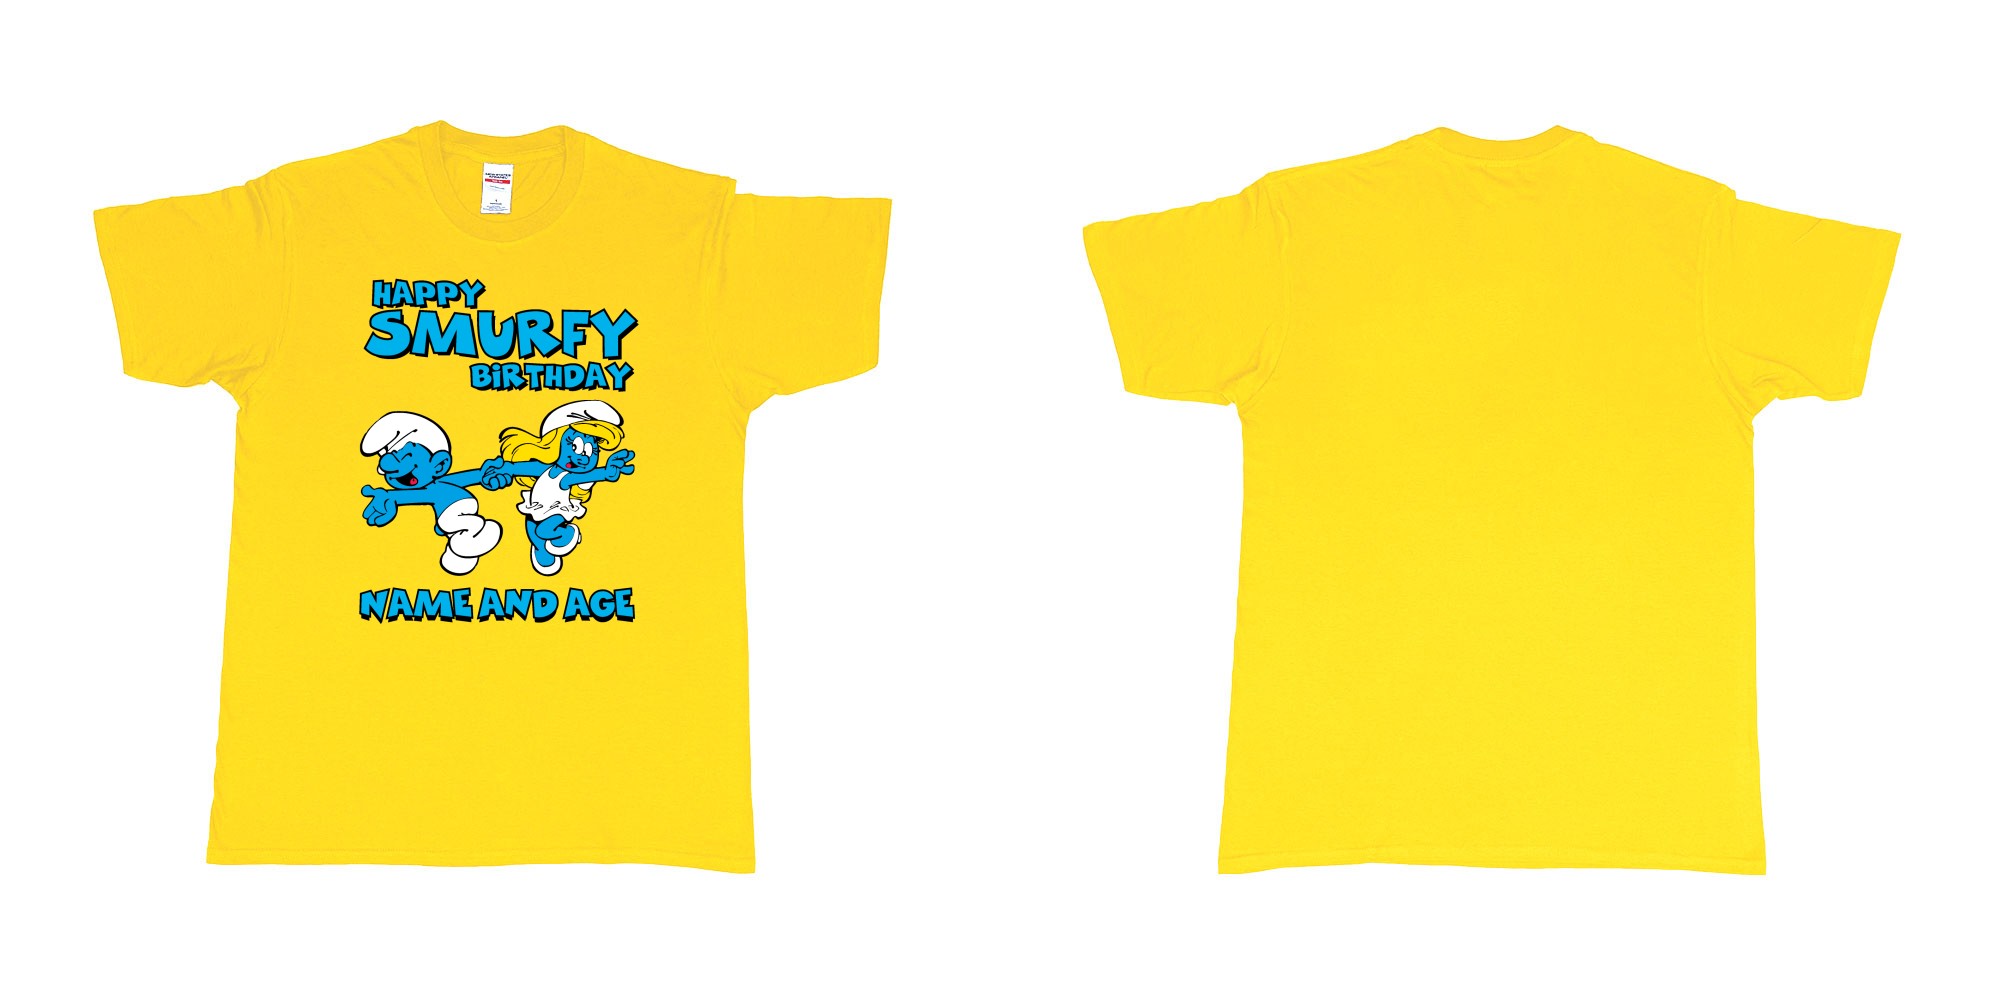 Custom tshirt design happy smurfy birthday in fabric color daisy choice your own text made in Bali by The Pirate Way